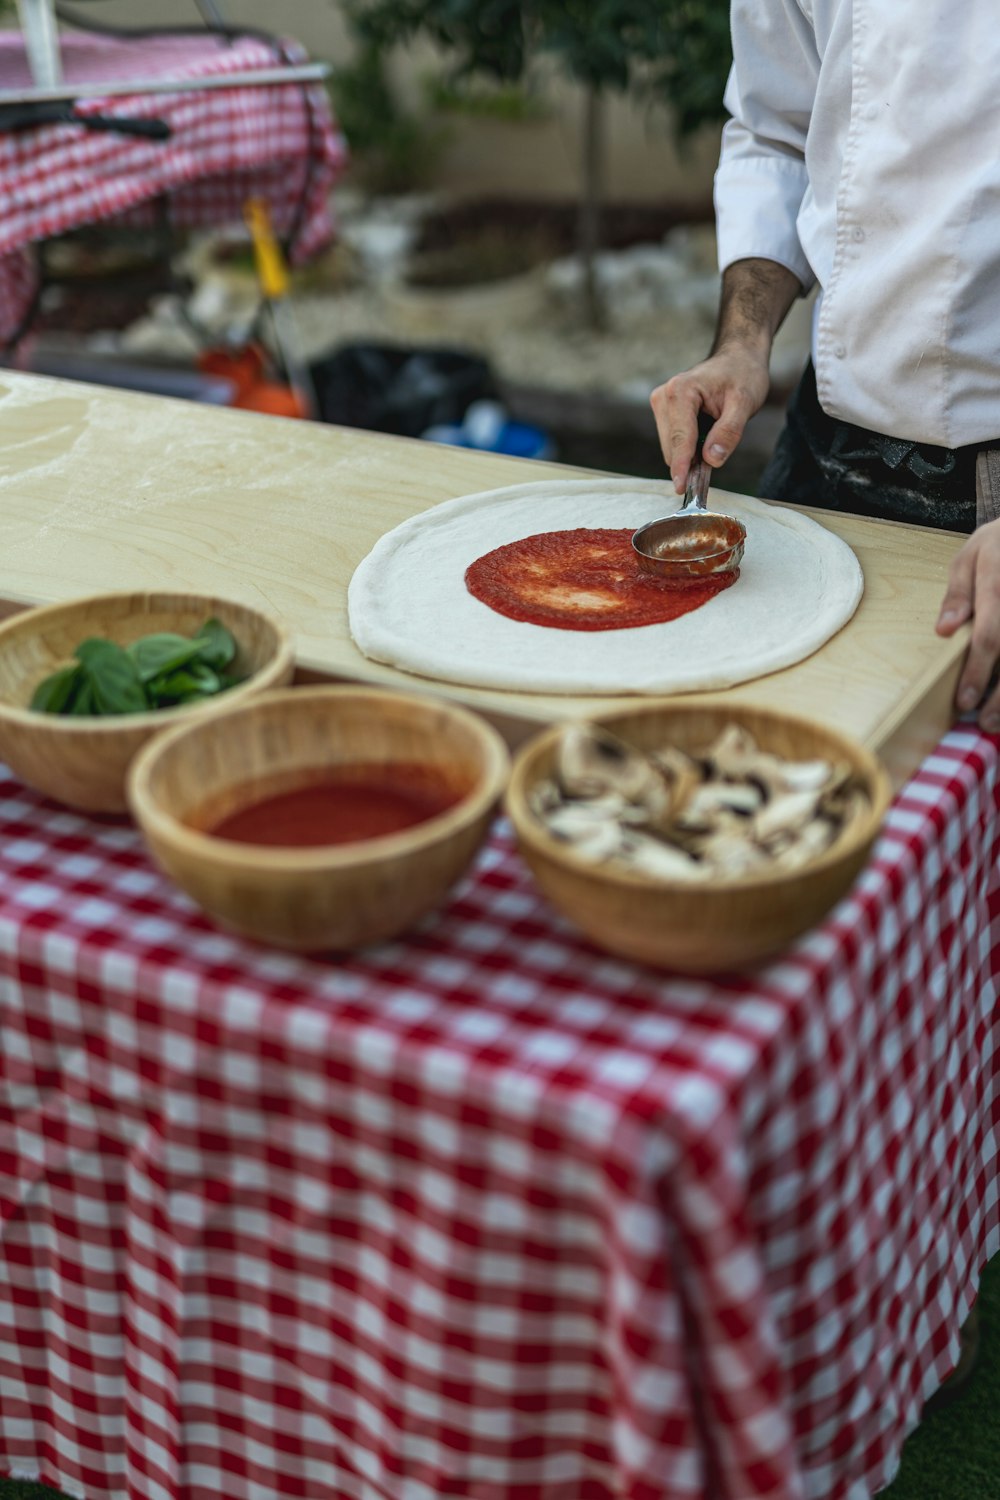 a man is preparing food on a table